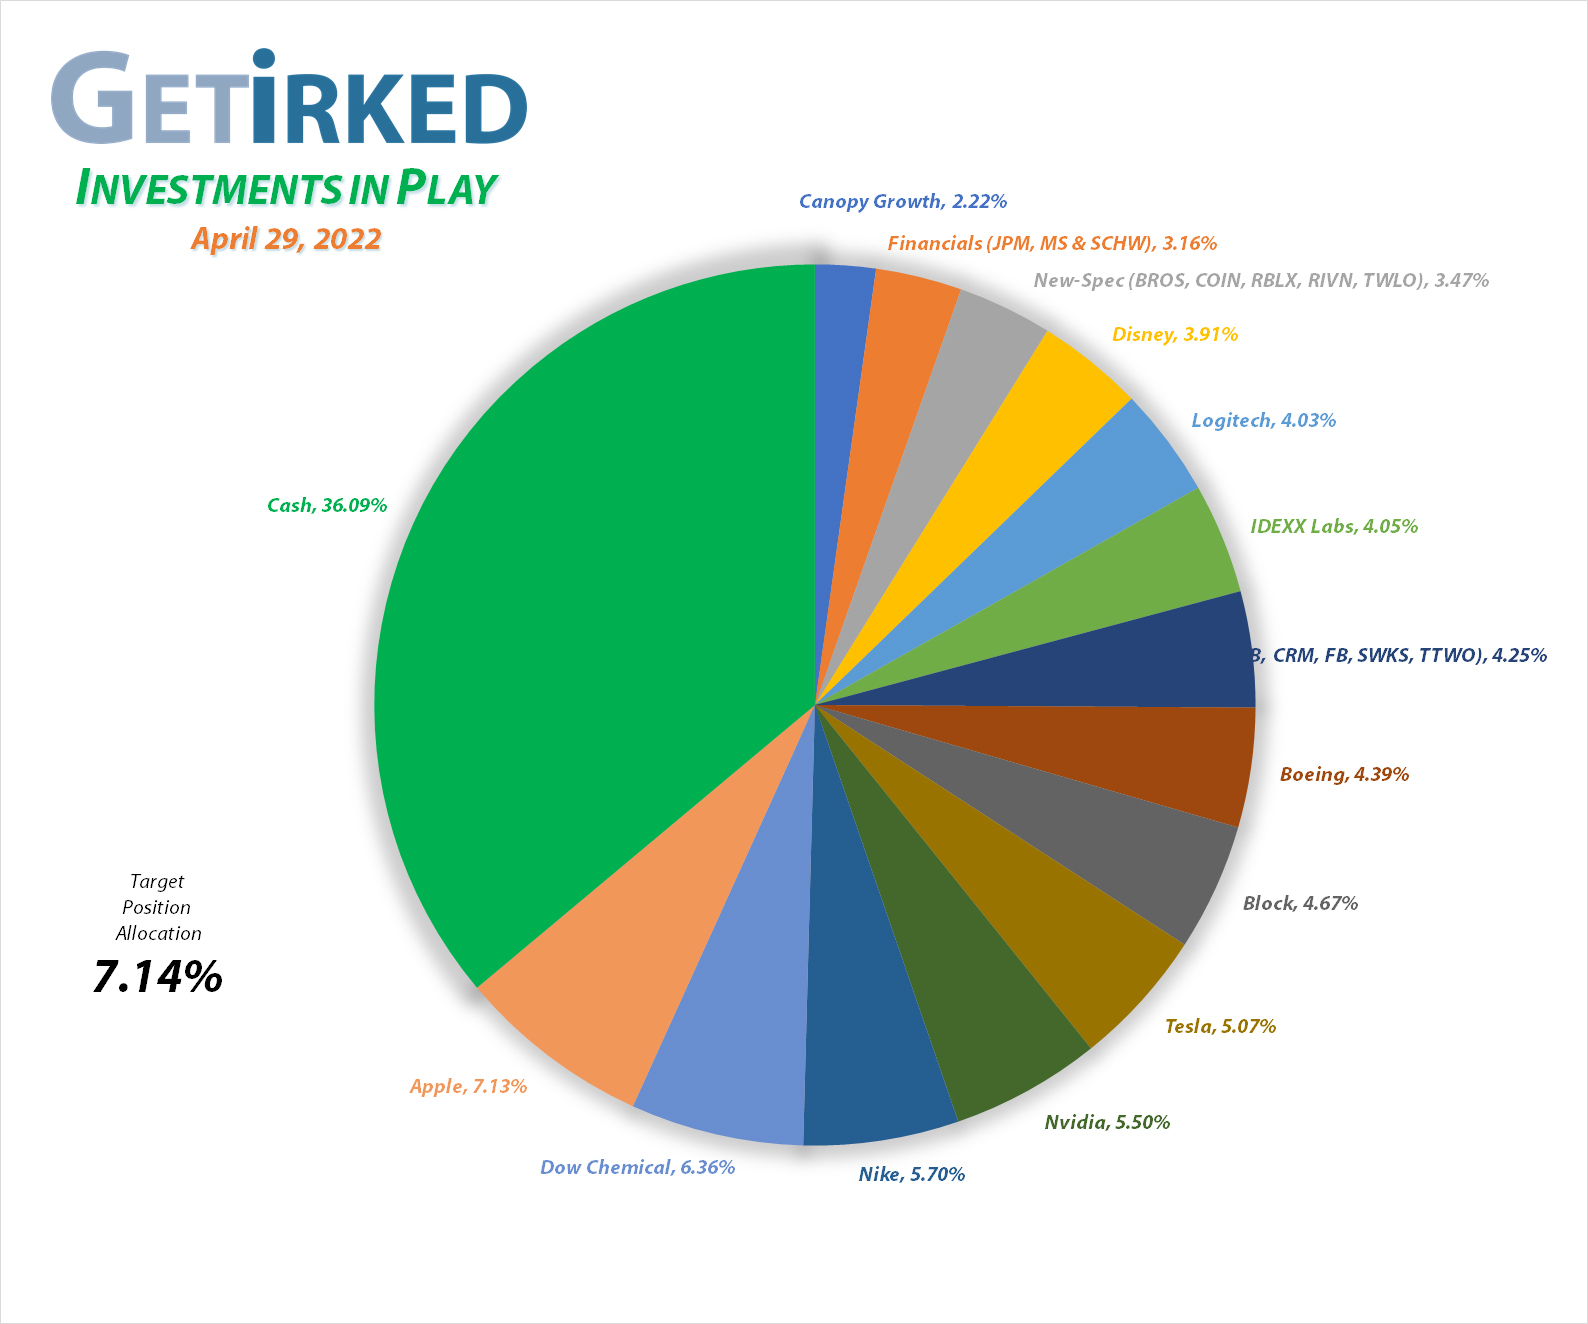 Get Irked - Investments in Play - Current Holdings - March 12, 2021et Irked's Pandemic Portfolio Holdings as of April 29, 2022